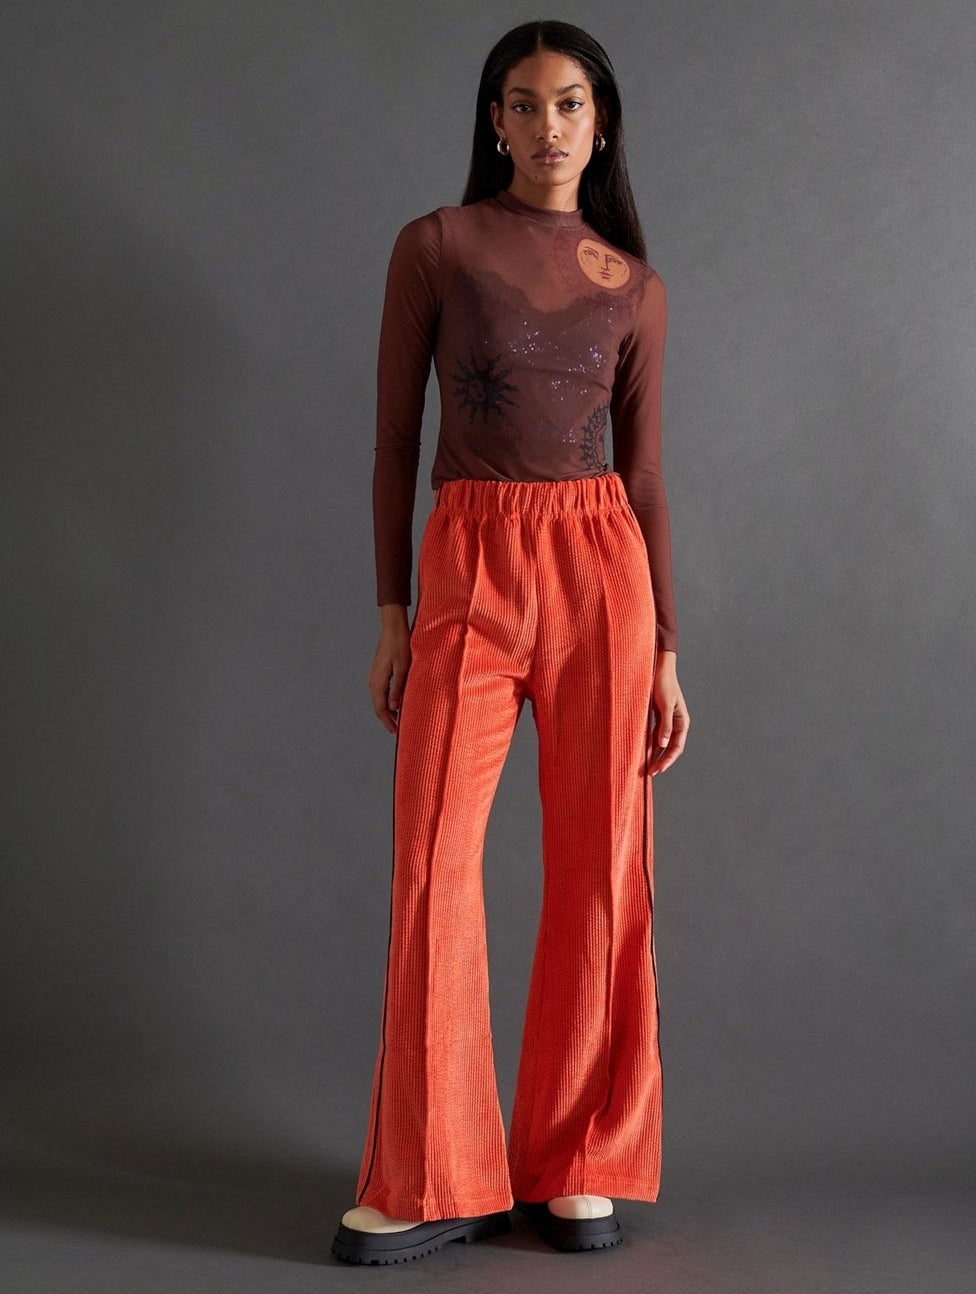 model in orange corduroy wide-legged pants with an elastic waist and seams down the front of the legs